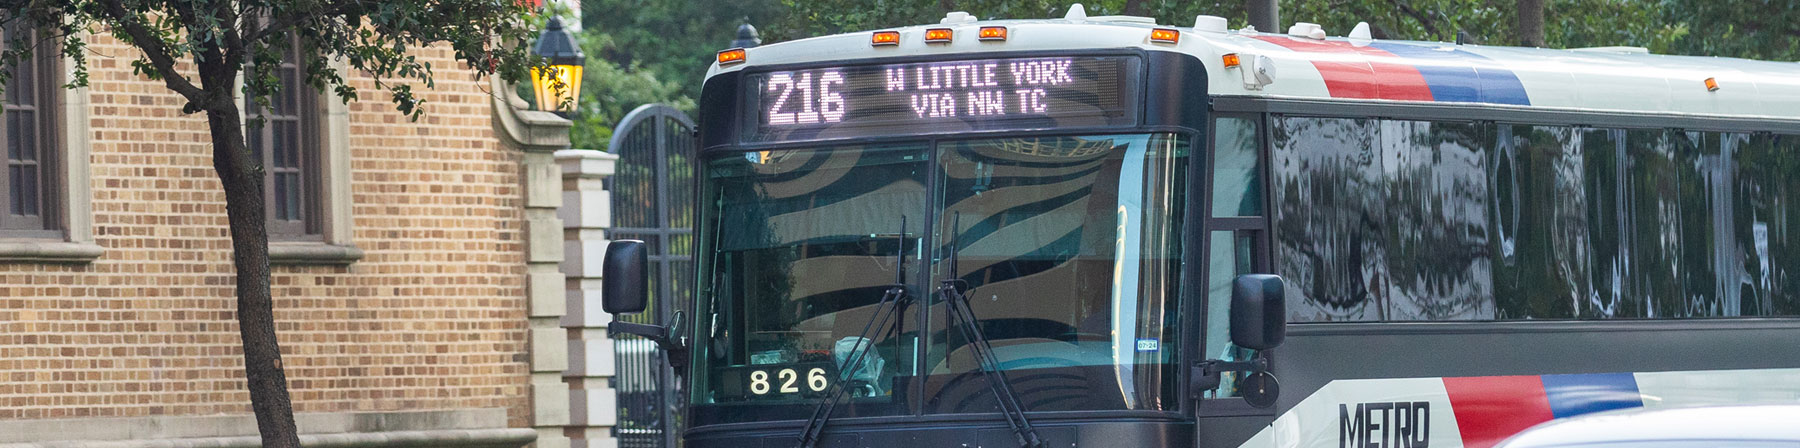 216 West Little York / Northwest Station Park and Ride Bus